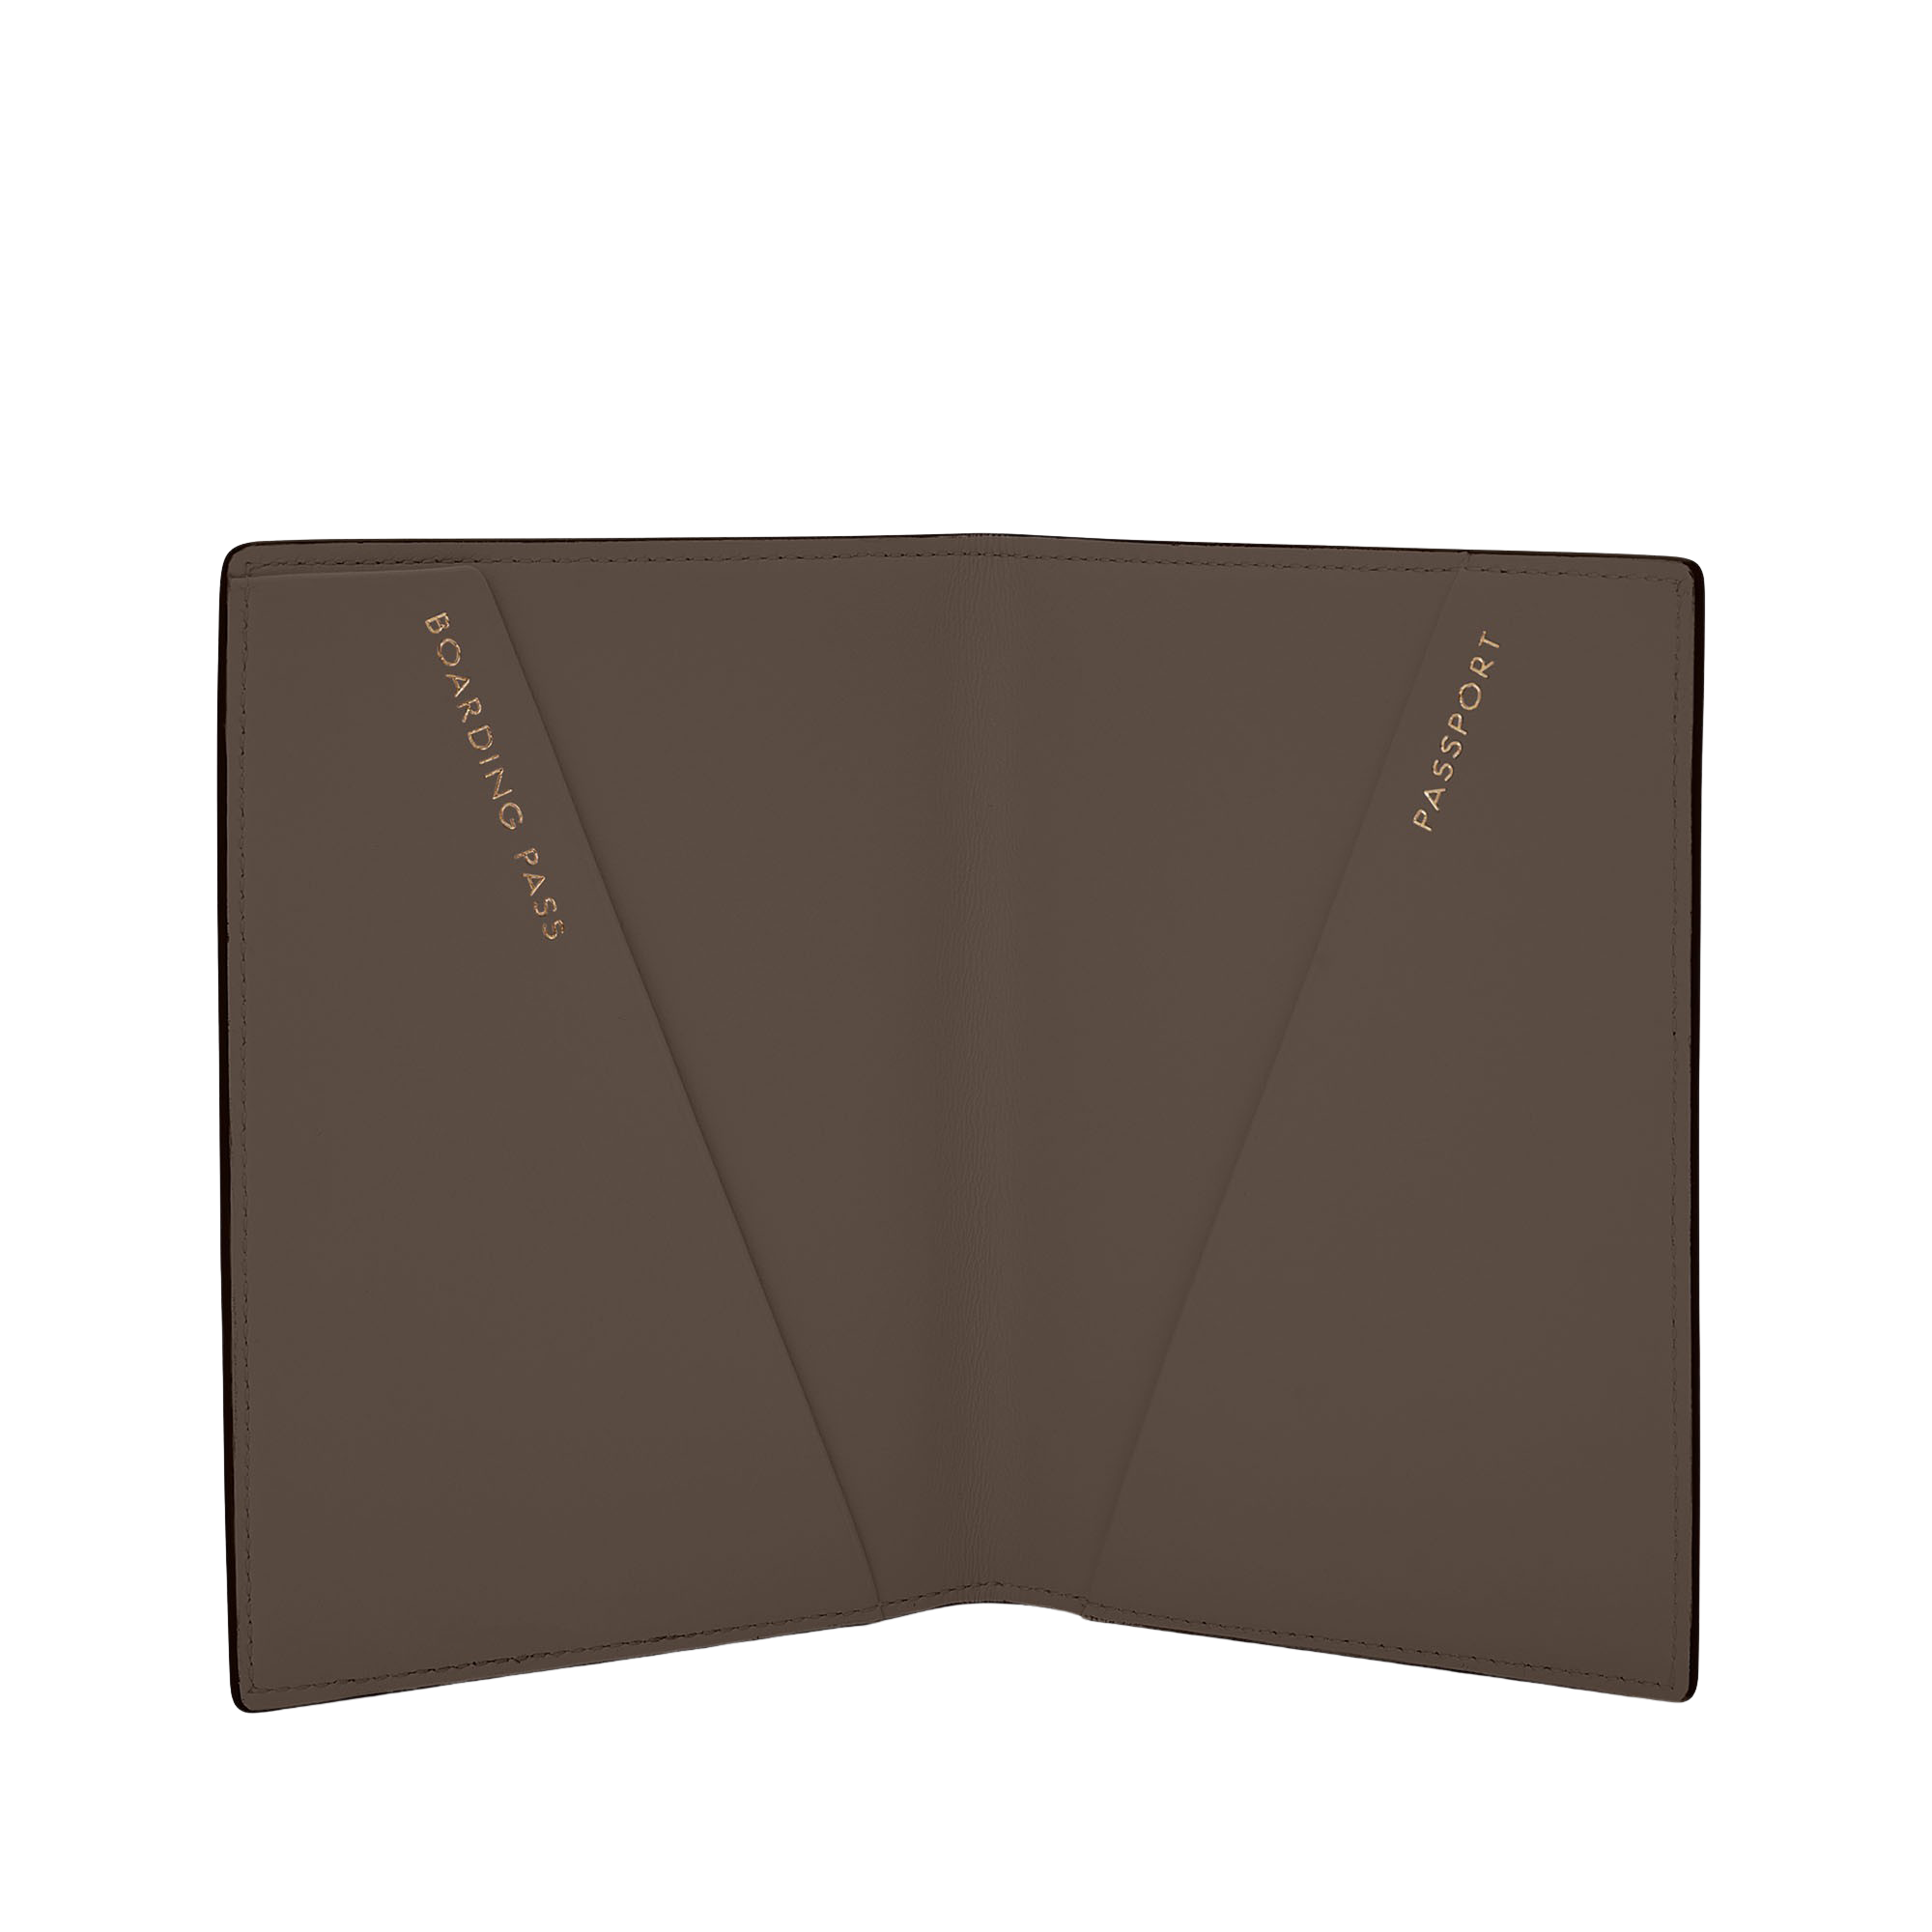 Smythson Taupe Brown Ludlow Leather Passport Cover Inside